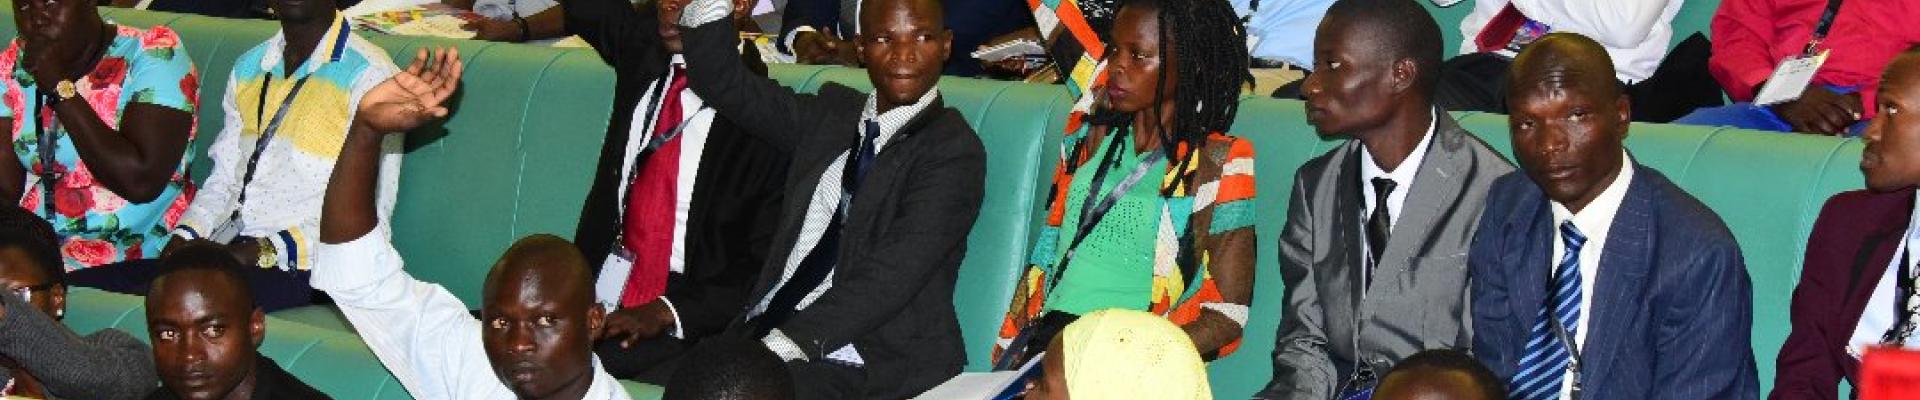 Young leaders in Uganda in the Ugandan Parliament lifting hands up